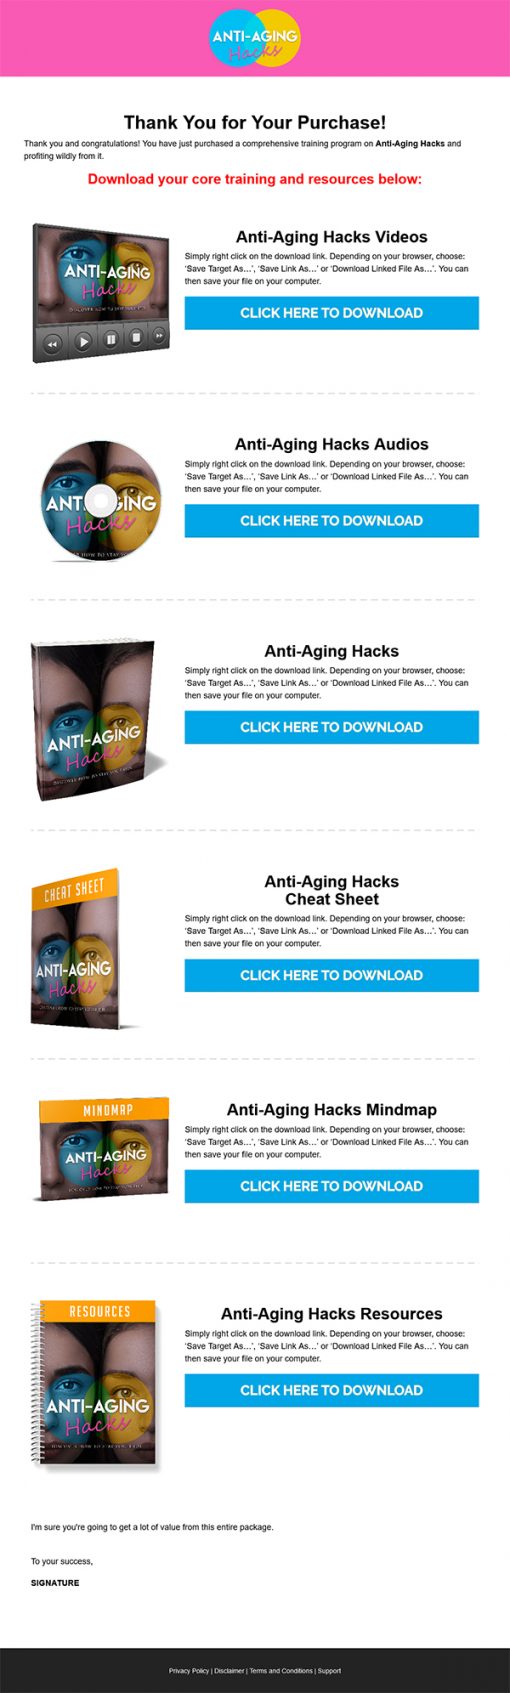 Anti-Aging Hacks Ebook and Videos MRR